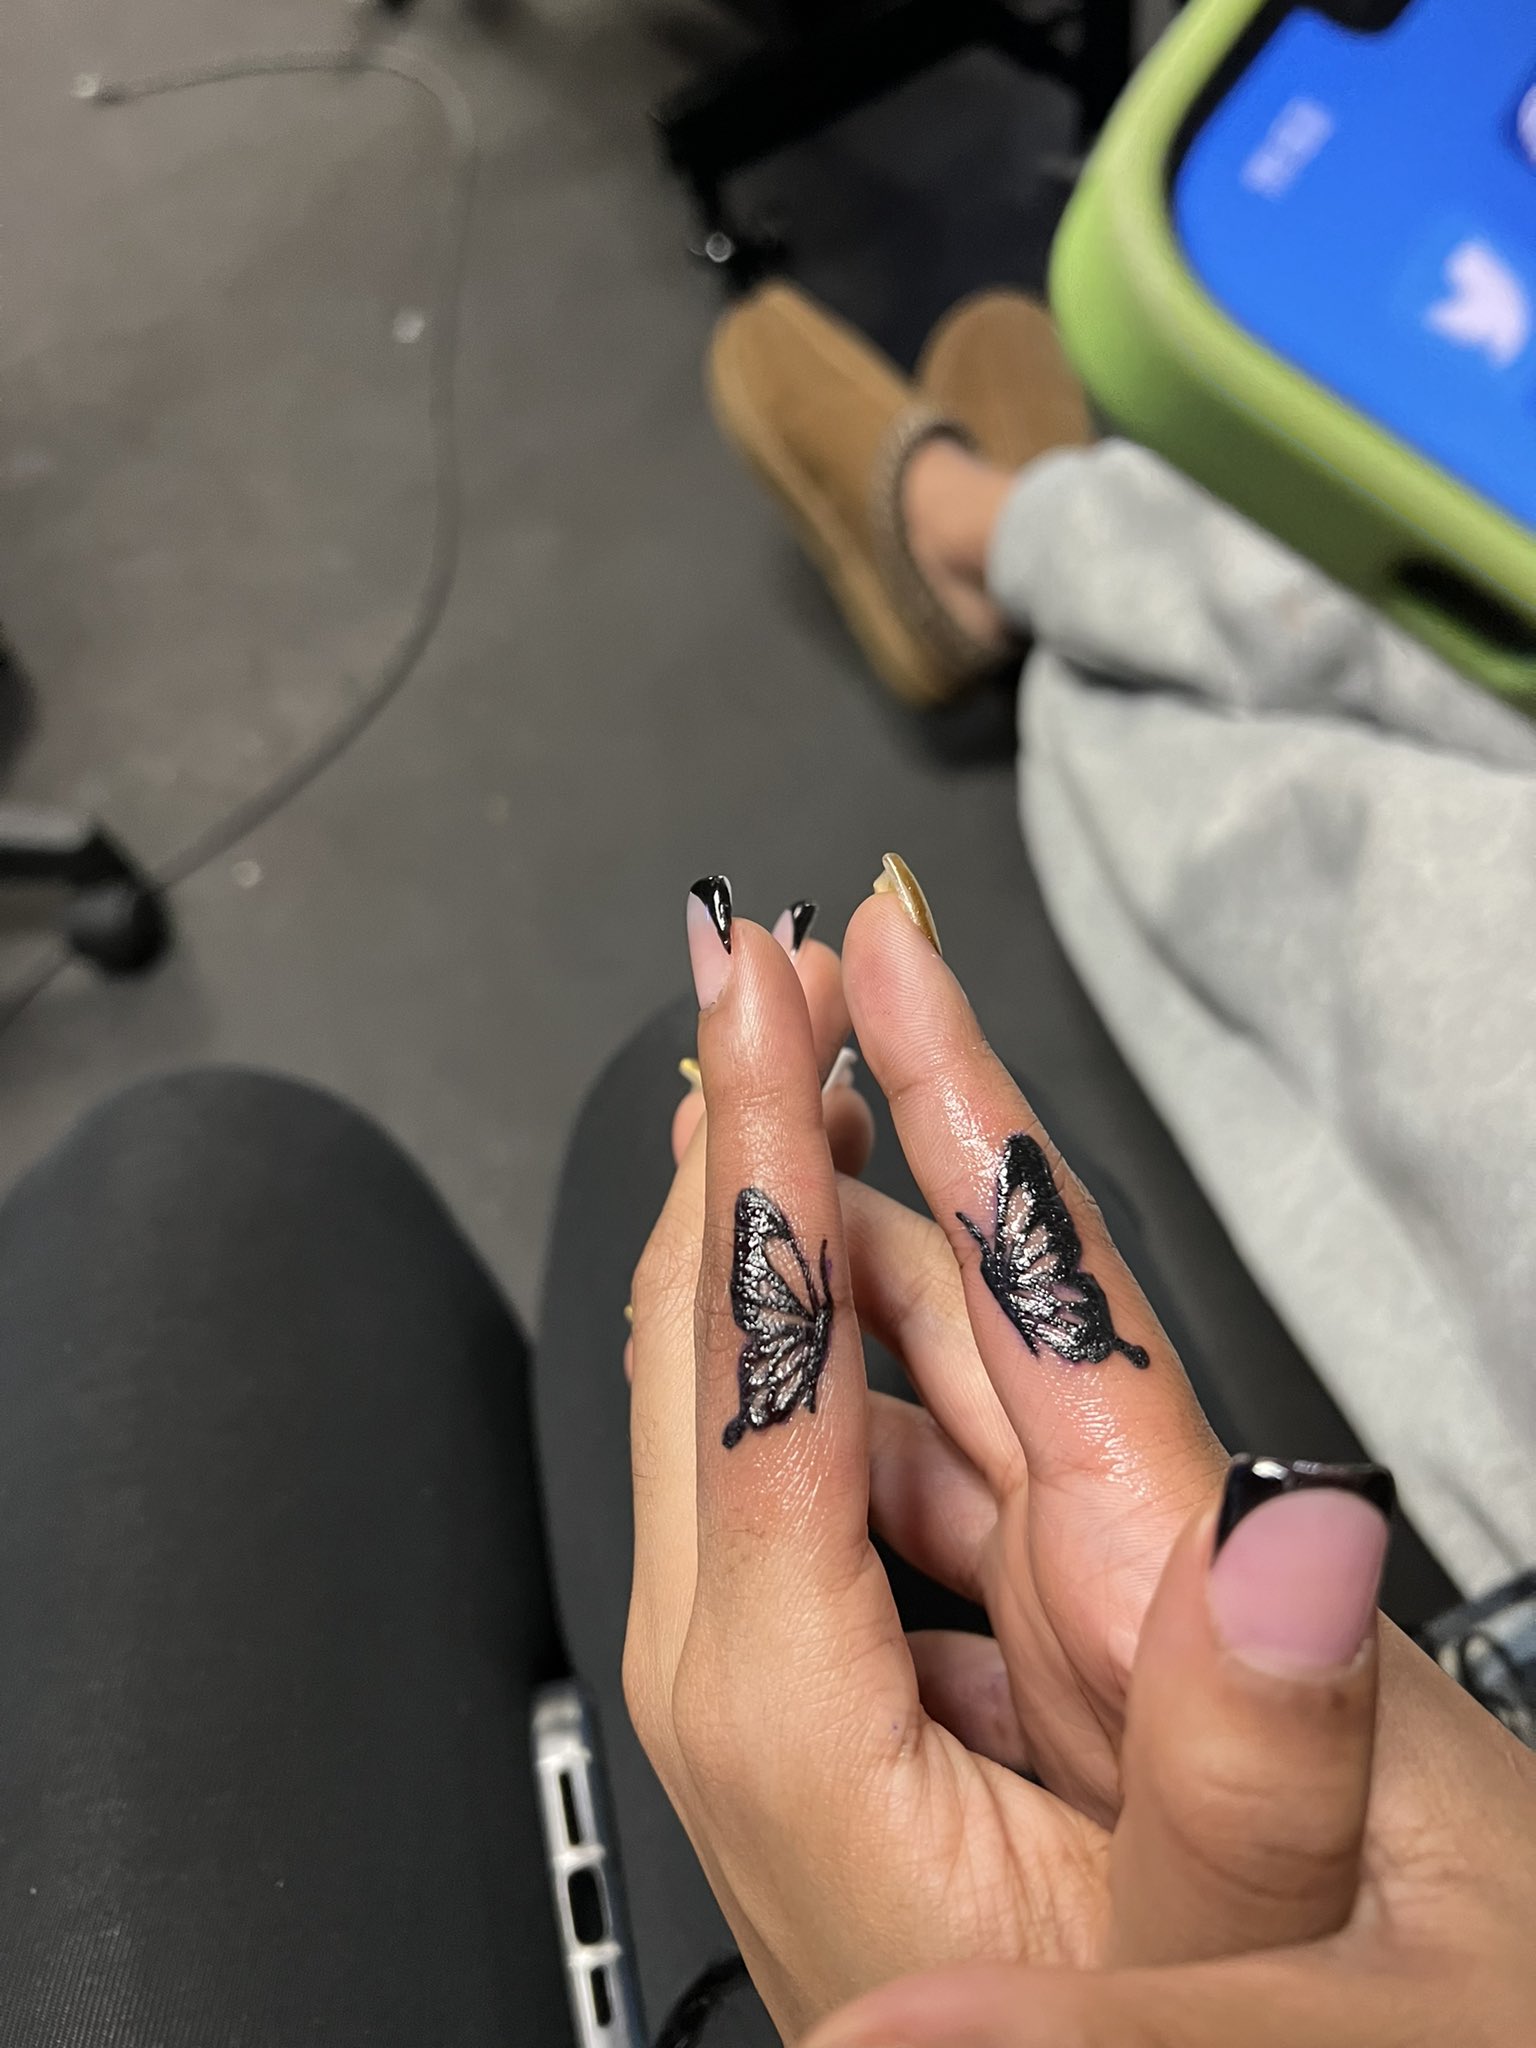 51 Top Amazing Ideas For Finger Tattoos | Matching tattoos, Arrow tattoo  finger, Finger tattoos